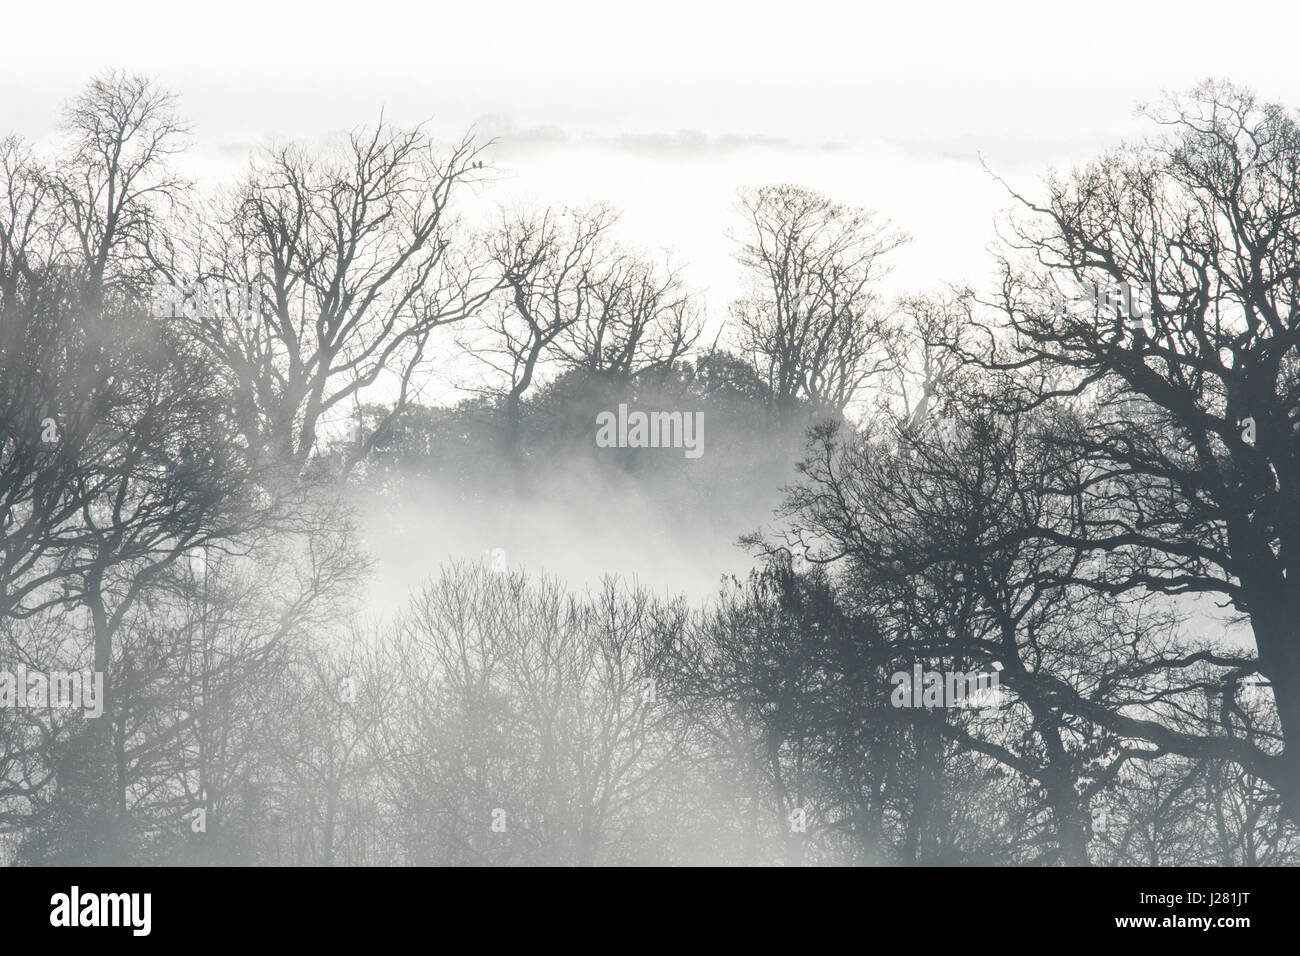 Branches of large trees silhouetted in morning low mist and fog. Sussex, UK. December. Stock Photo